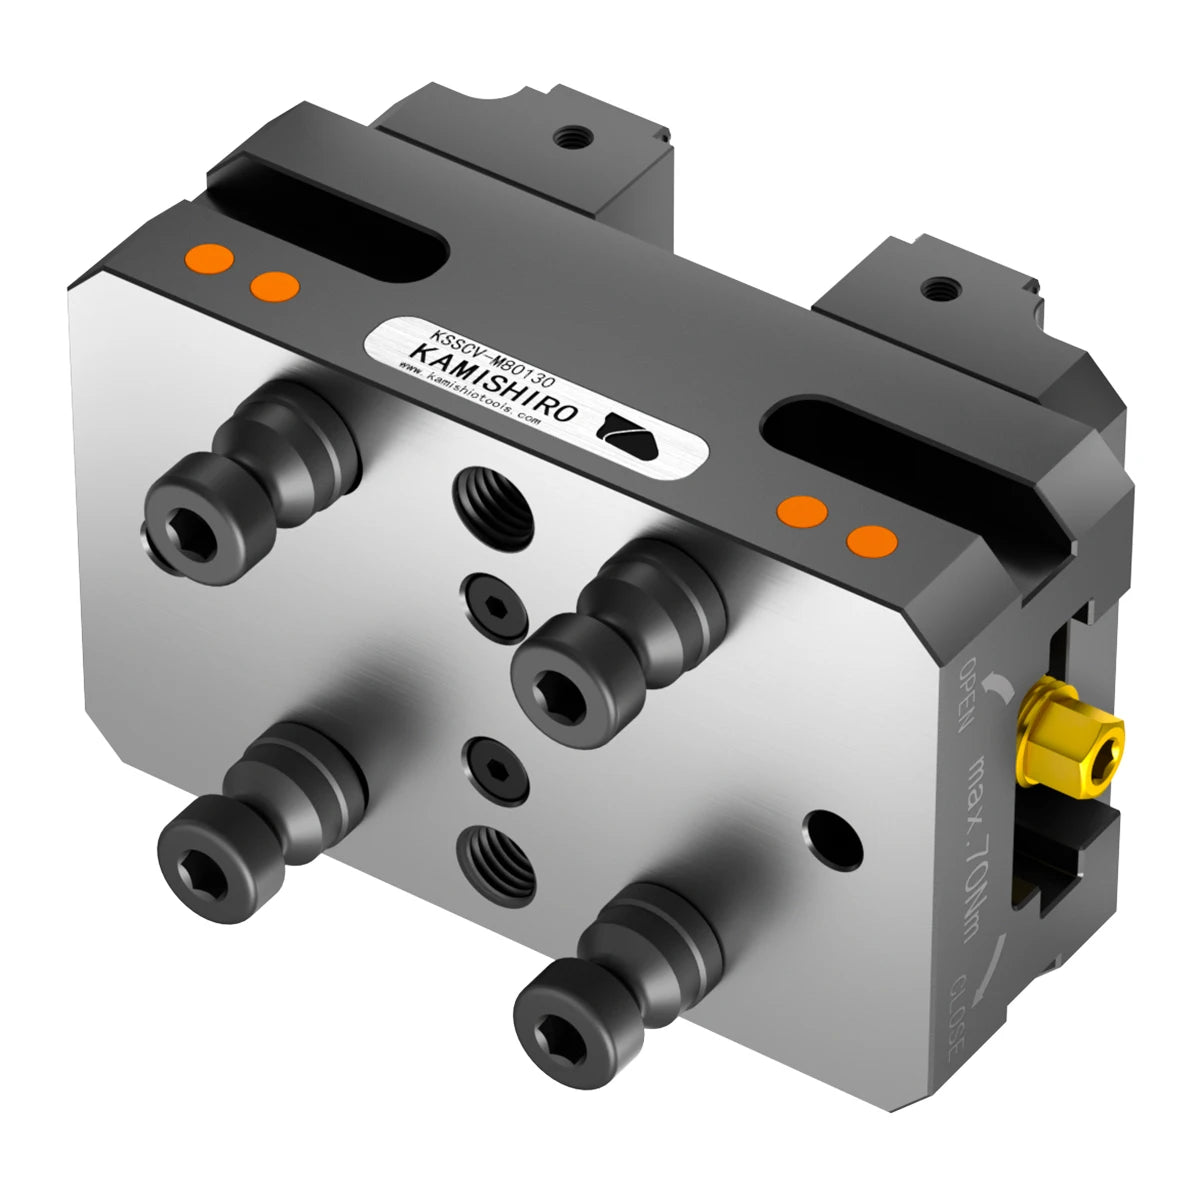 Self Centering Vise High Precision vice 125mm  Kamishiro   High Quality 5-axis  vise  self centering Vise for milling machine